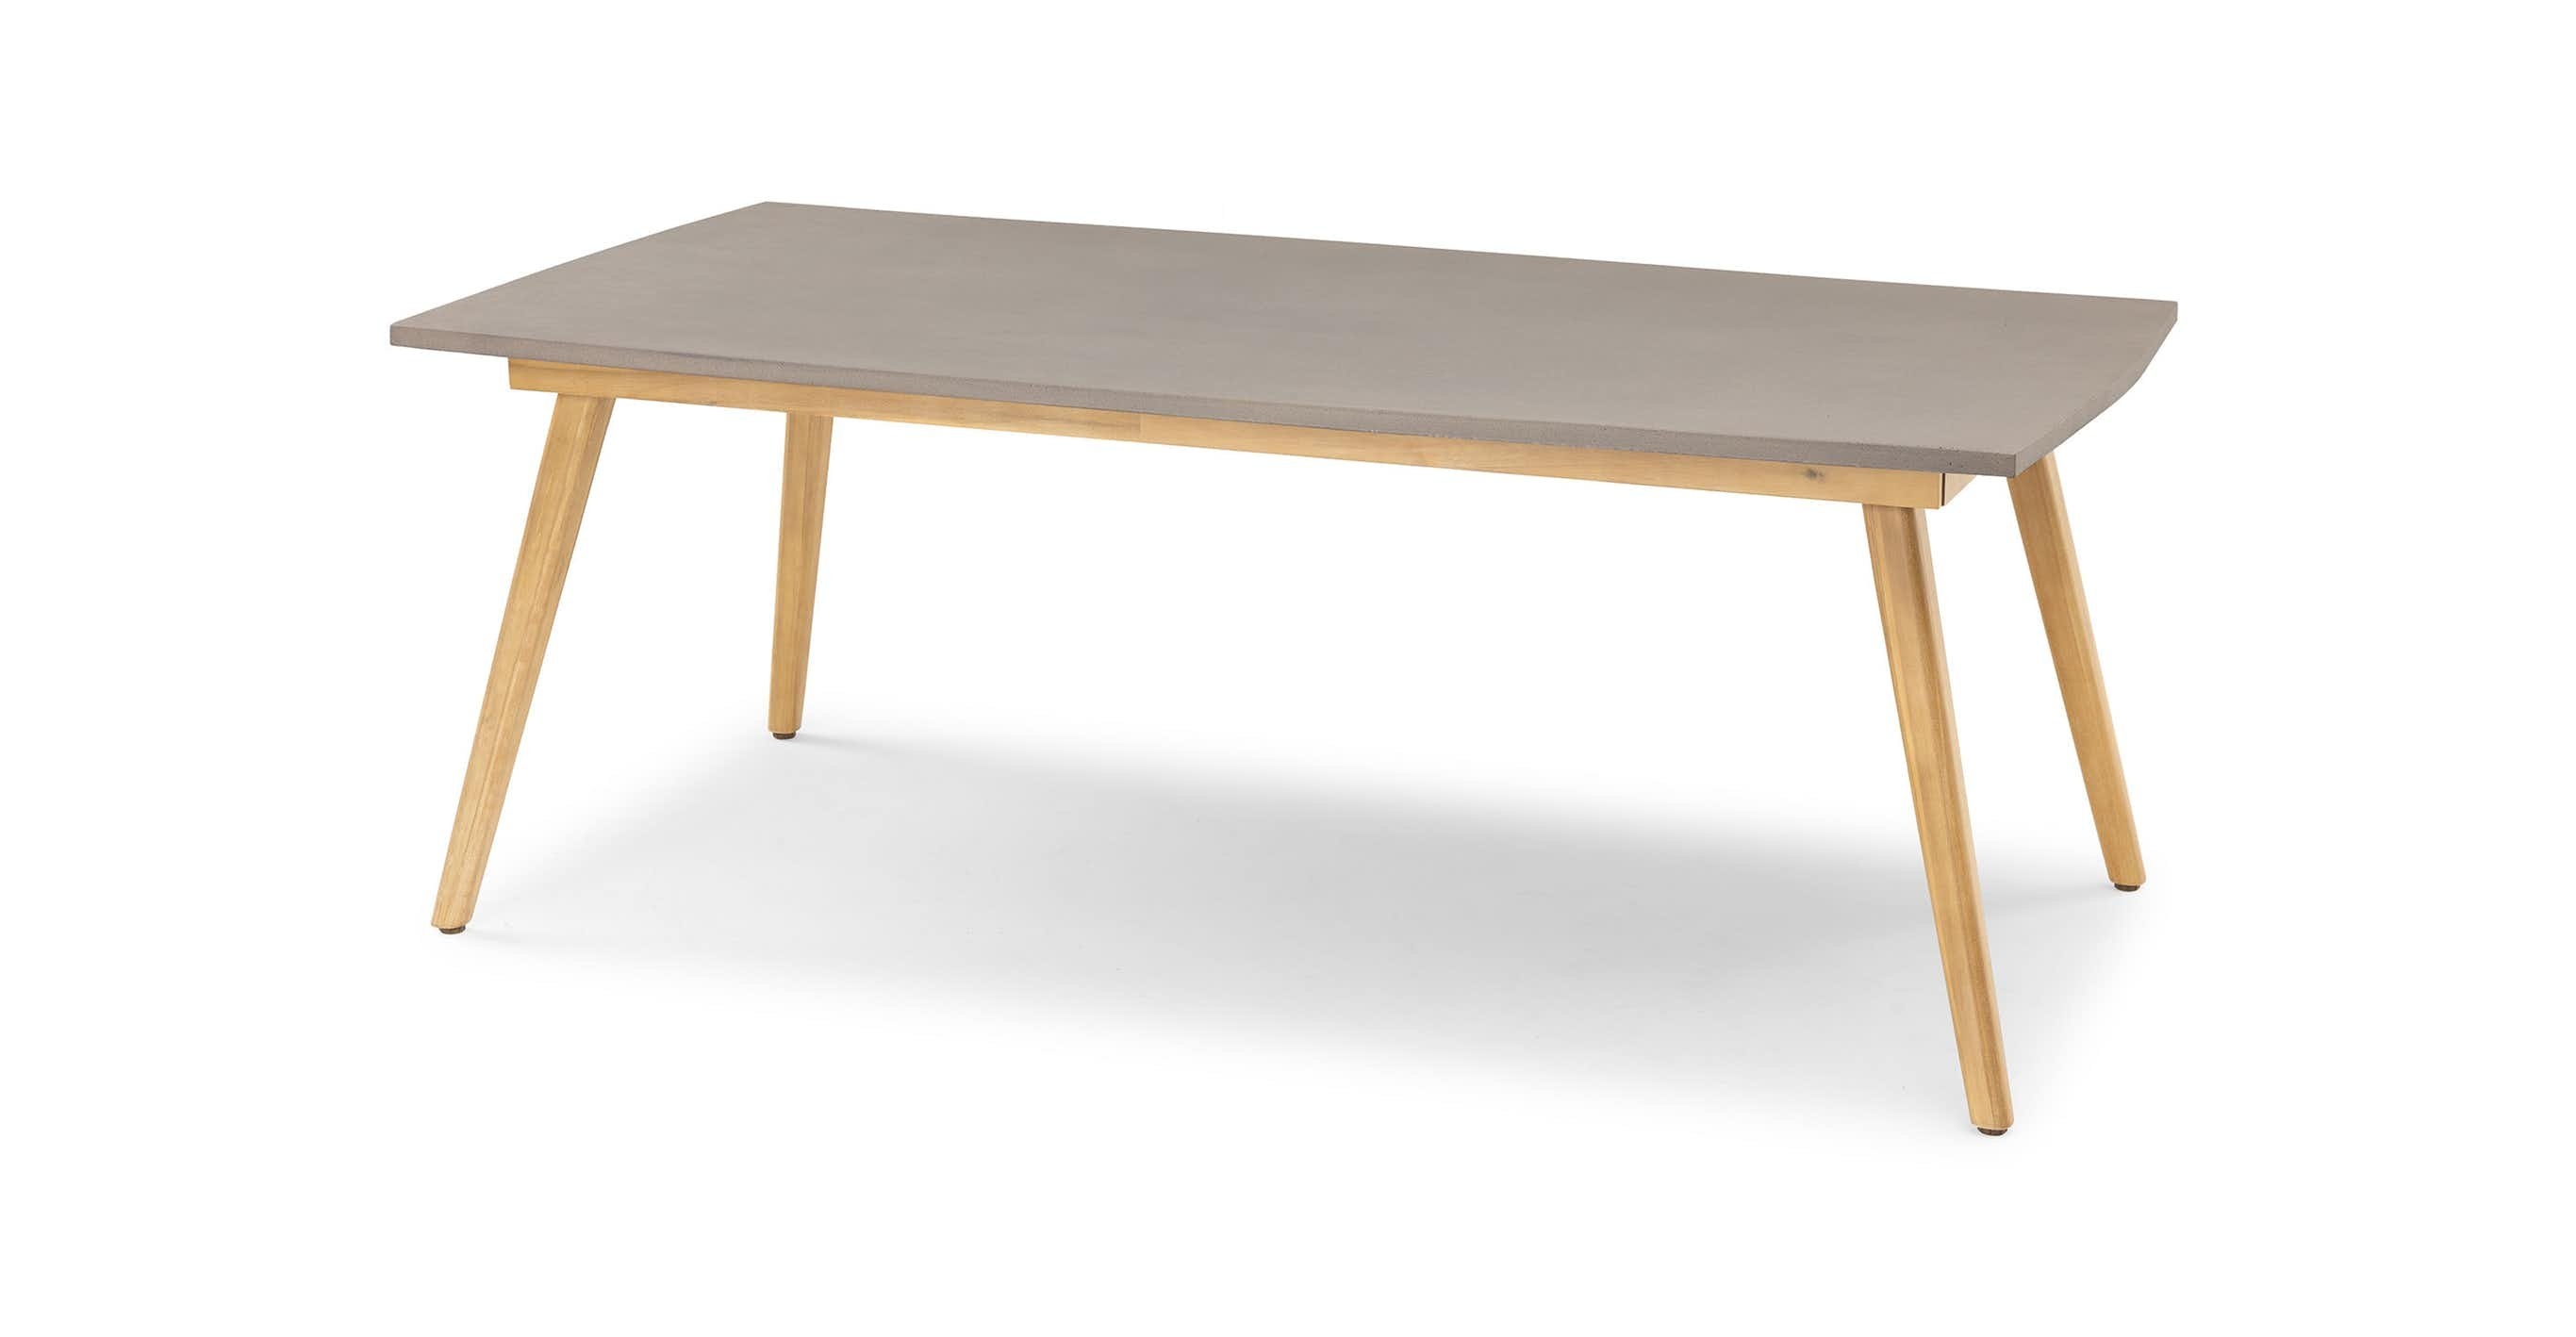 Atra Concrete Dining Table for 6 - Image 0